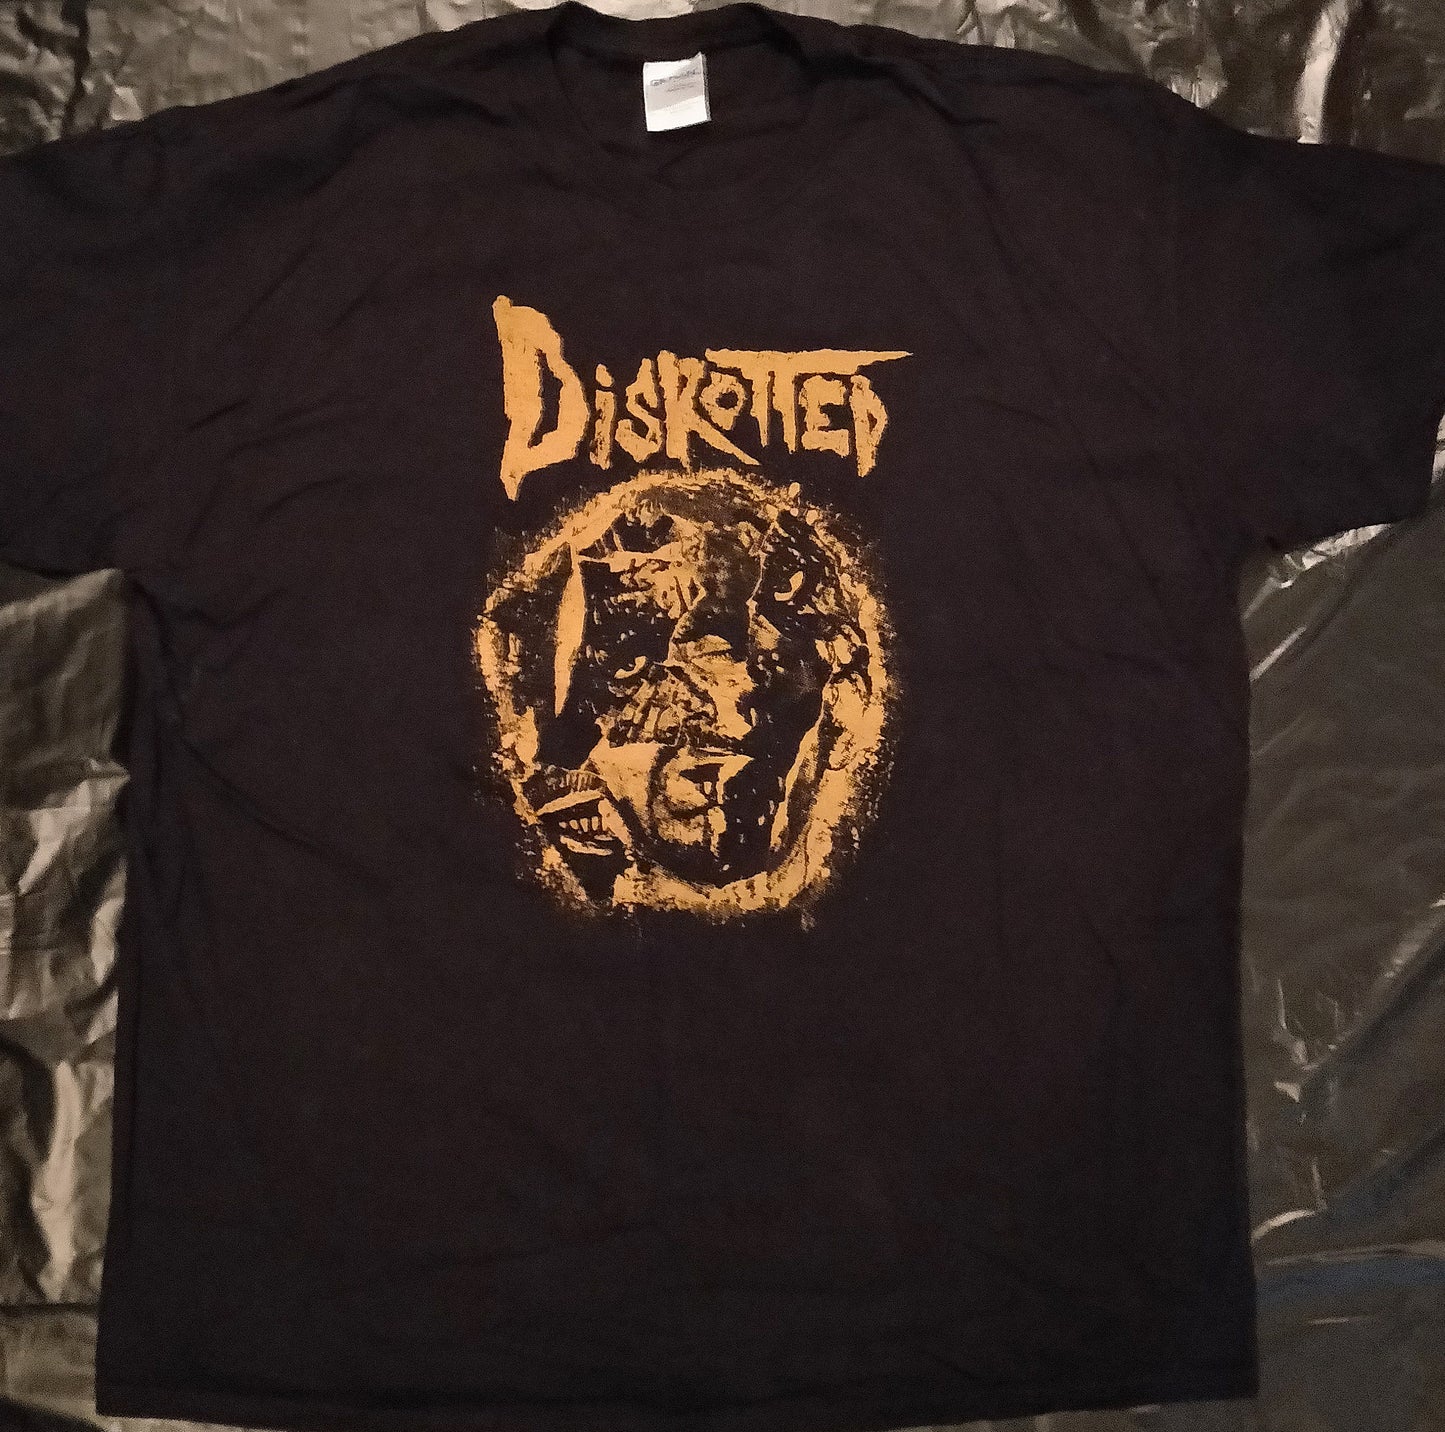 DISROTTED - T-shirt